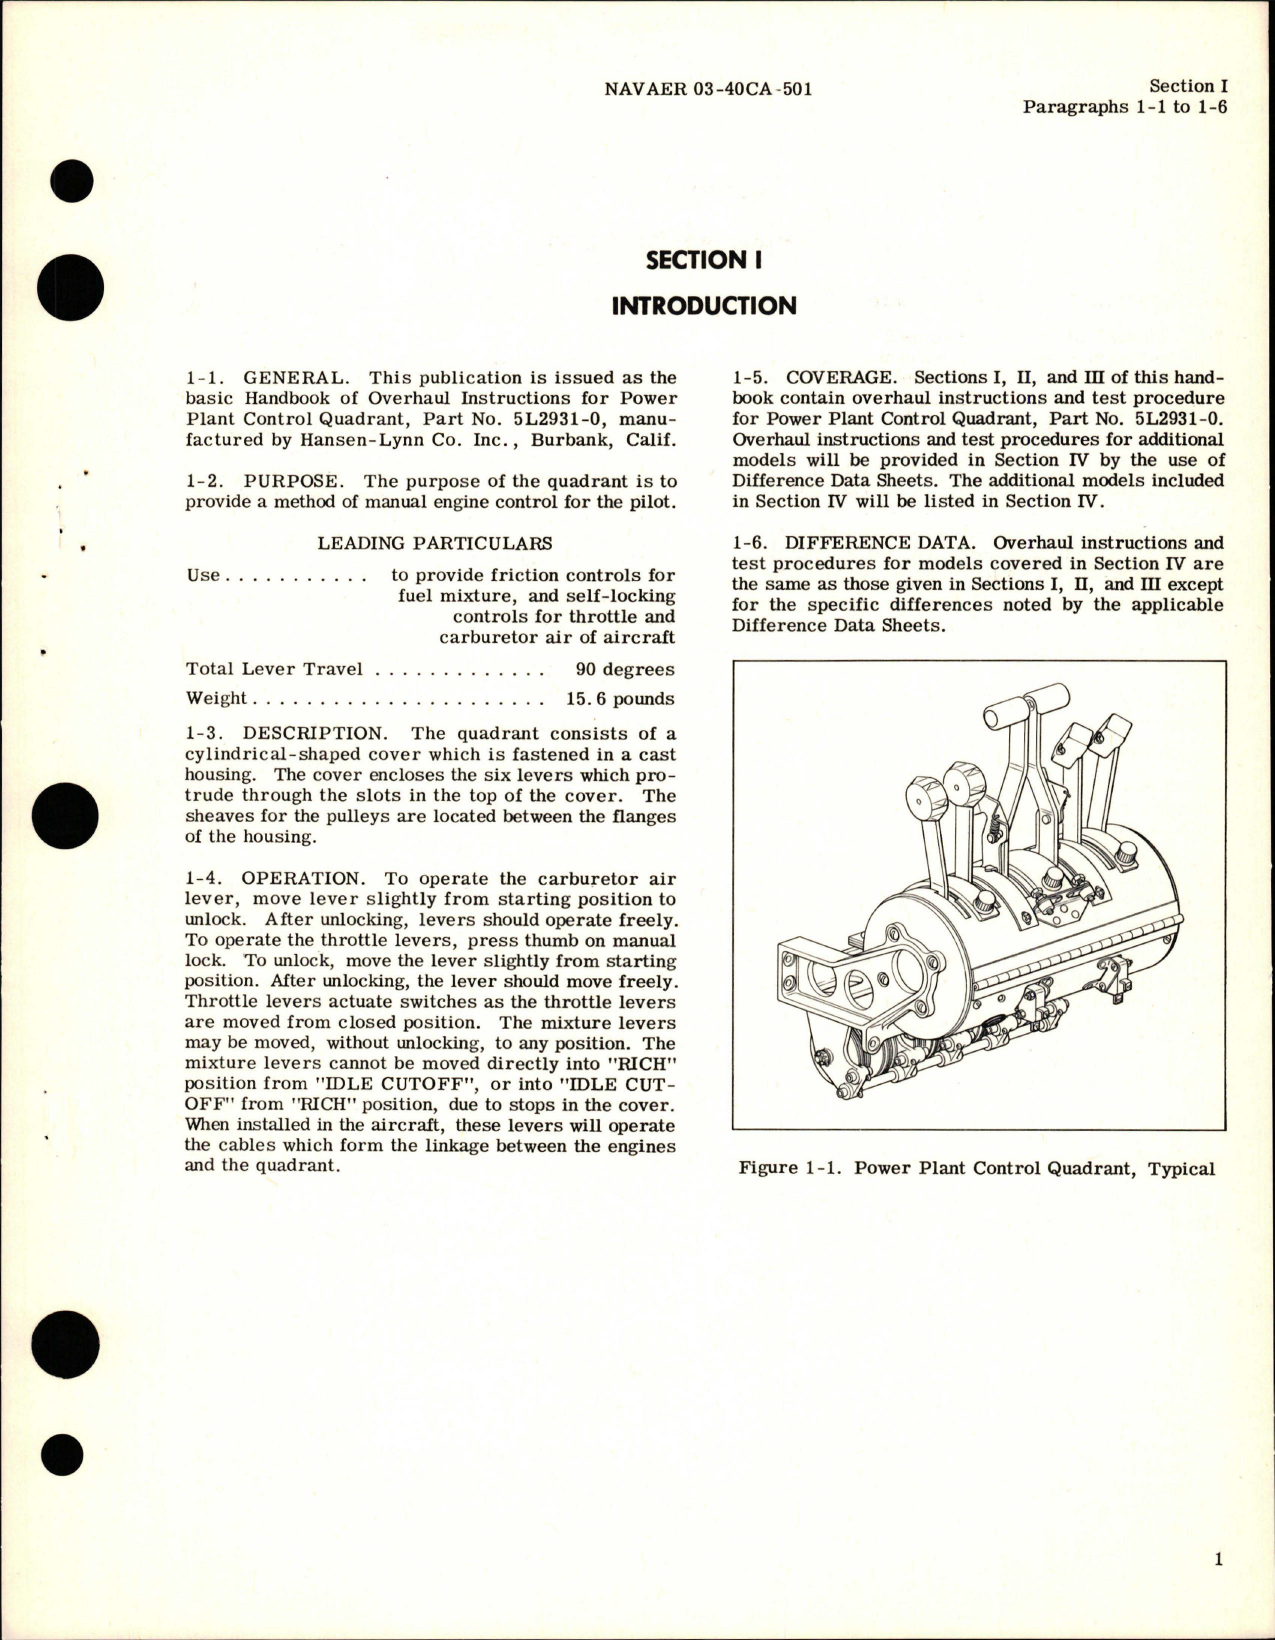 Sample page 5 from AirCorps Library document: Overhaul Instructions for Power Plant Control Quadrant - Parts 5L2931-0, 5L2931-1, 5L2931-2, and 5L2931-3